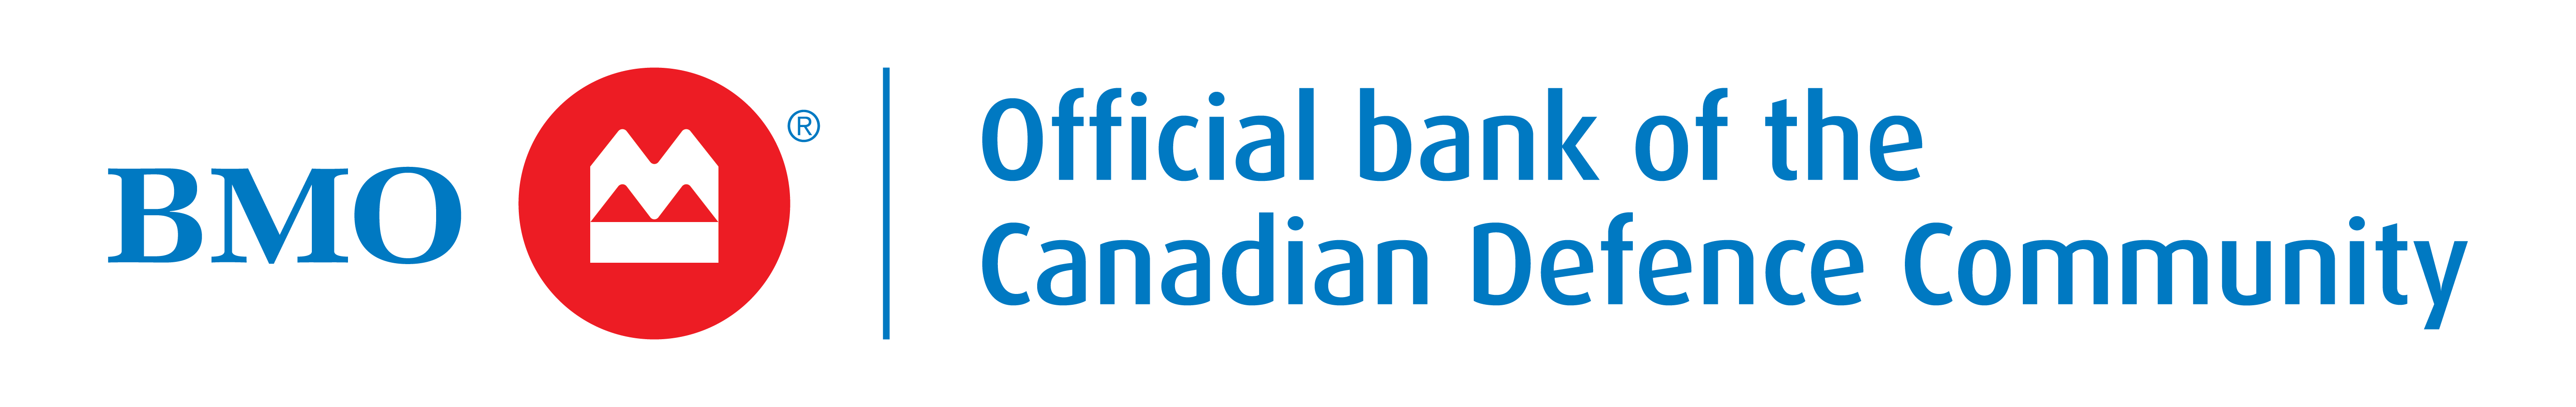 Canadian Defence Community Banking Bmo Bank Of Montreal